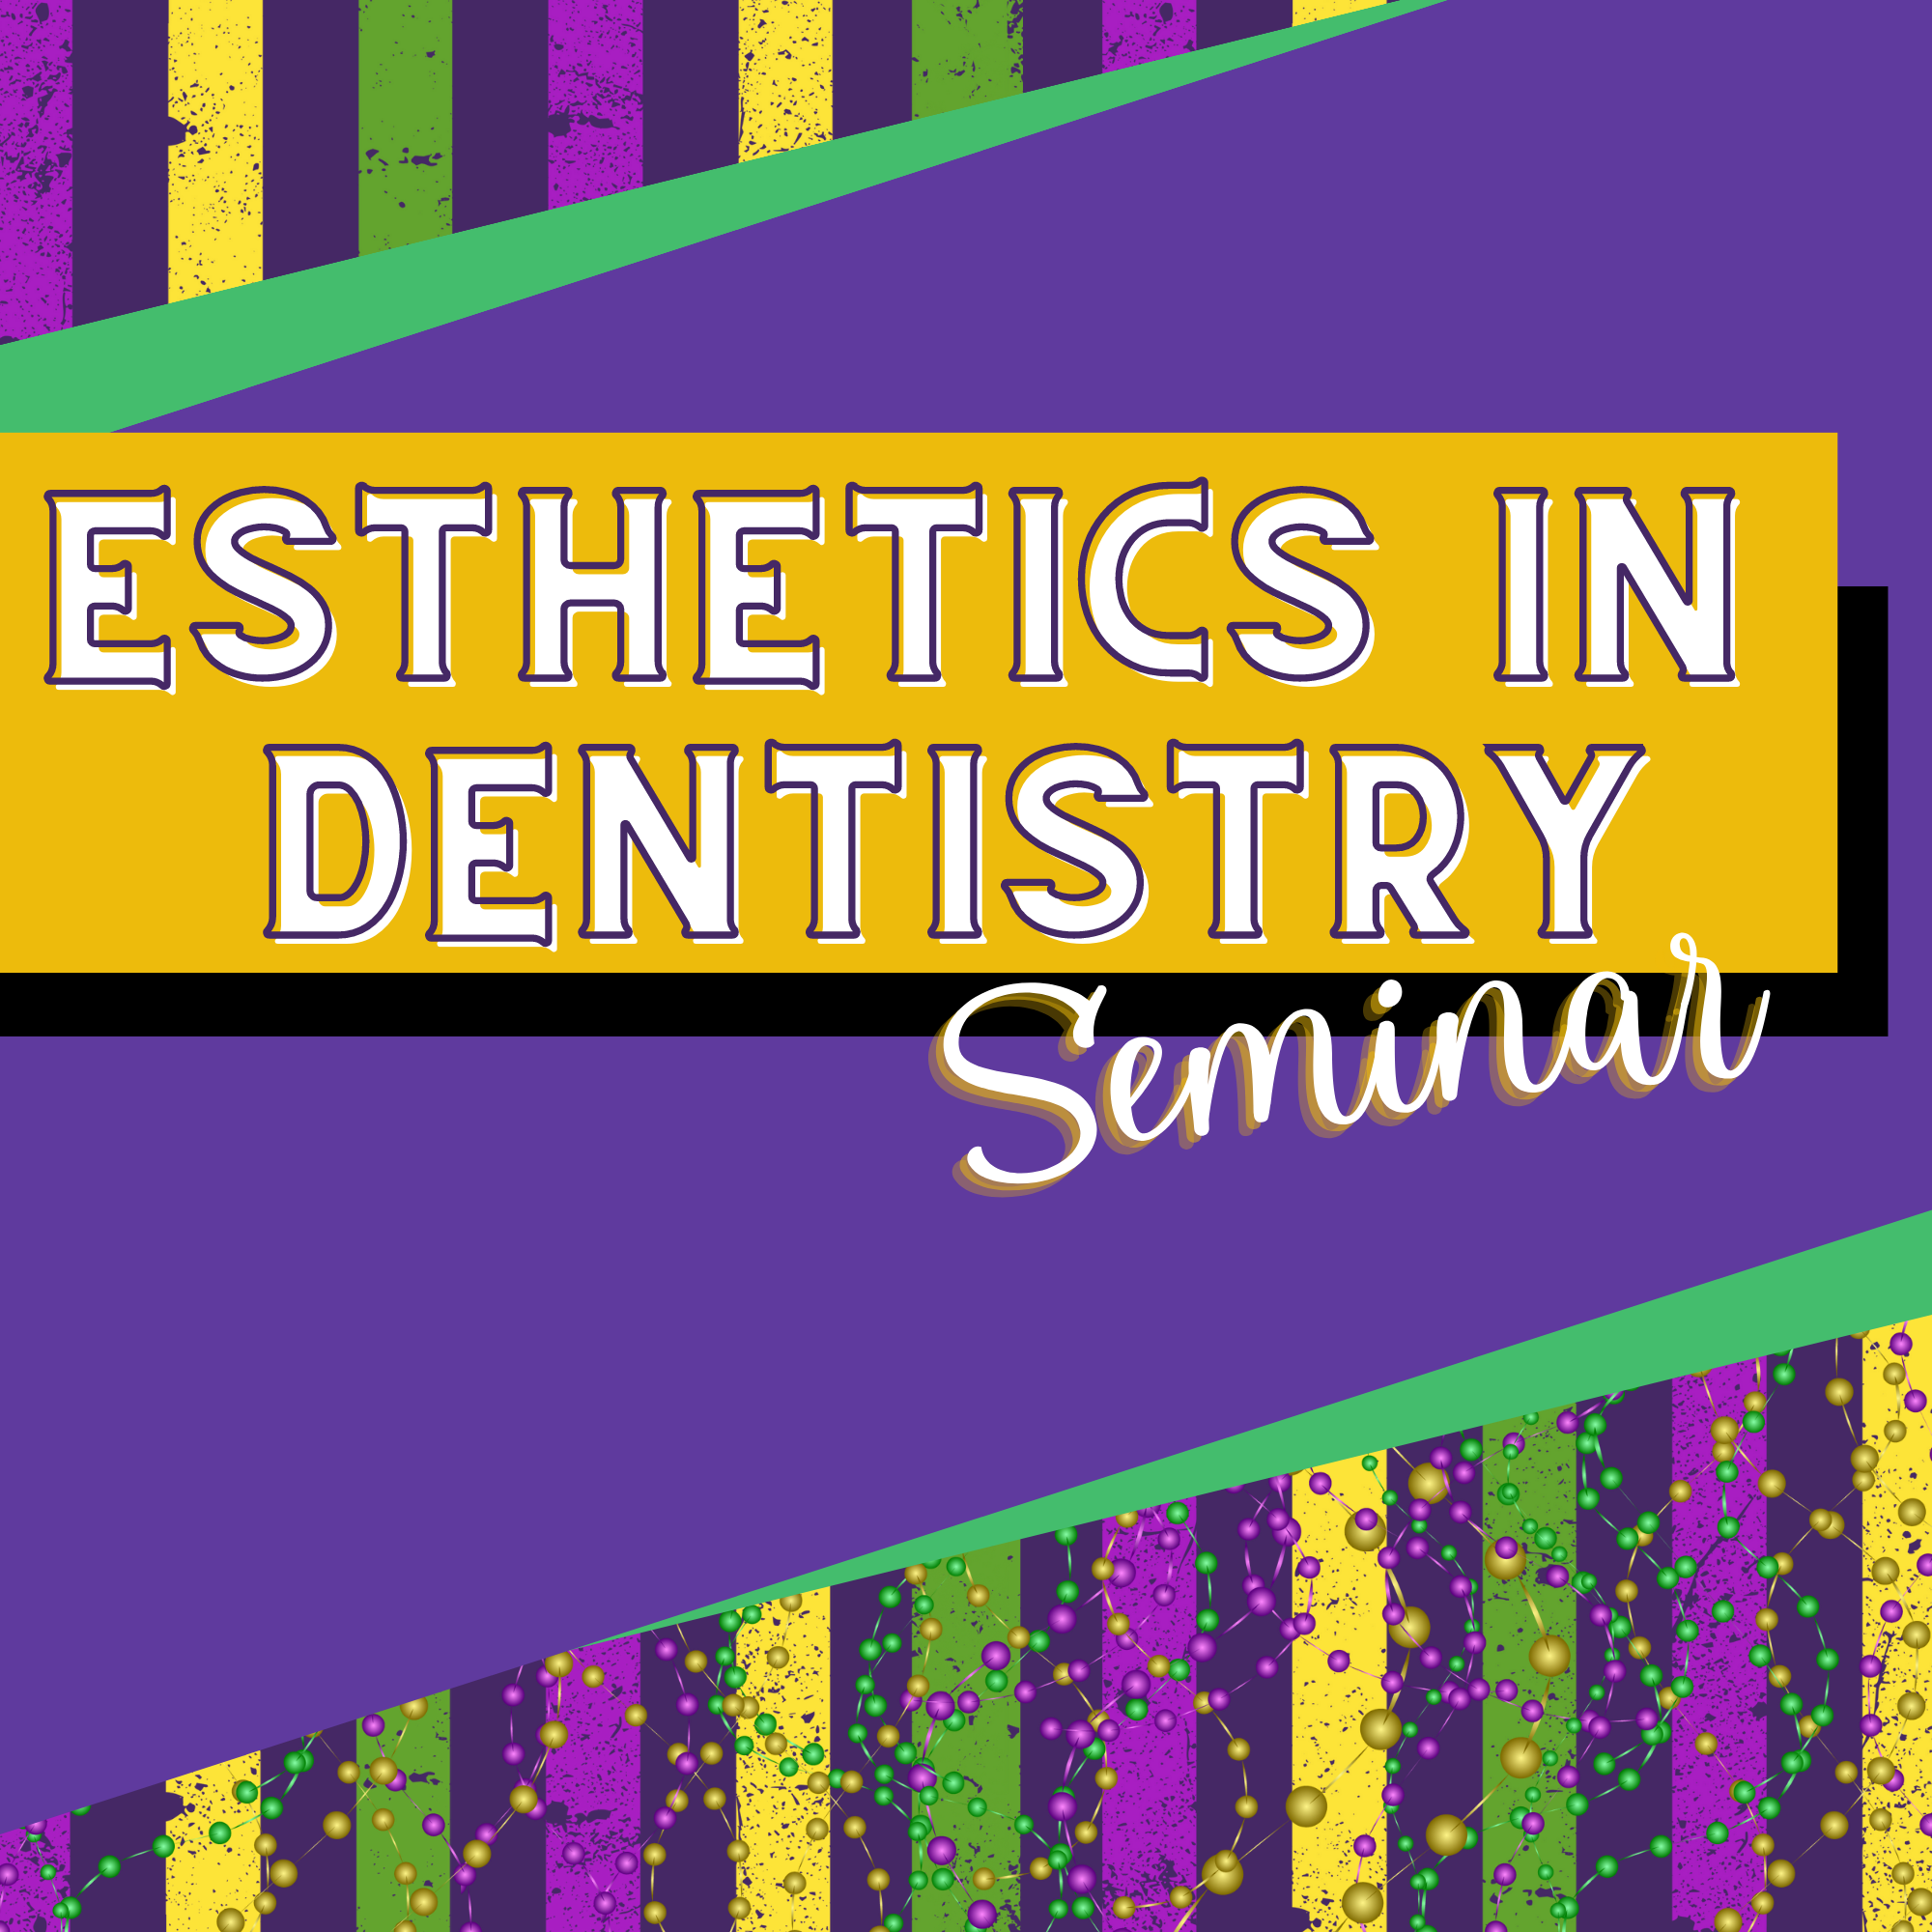 Second conference - Esthetics in dentistry seminar hosted by David Hornbrook